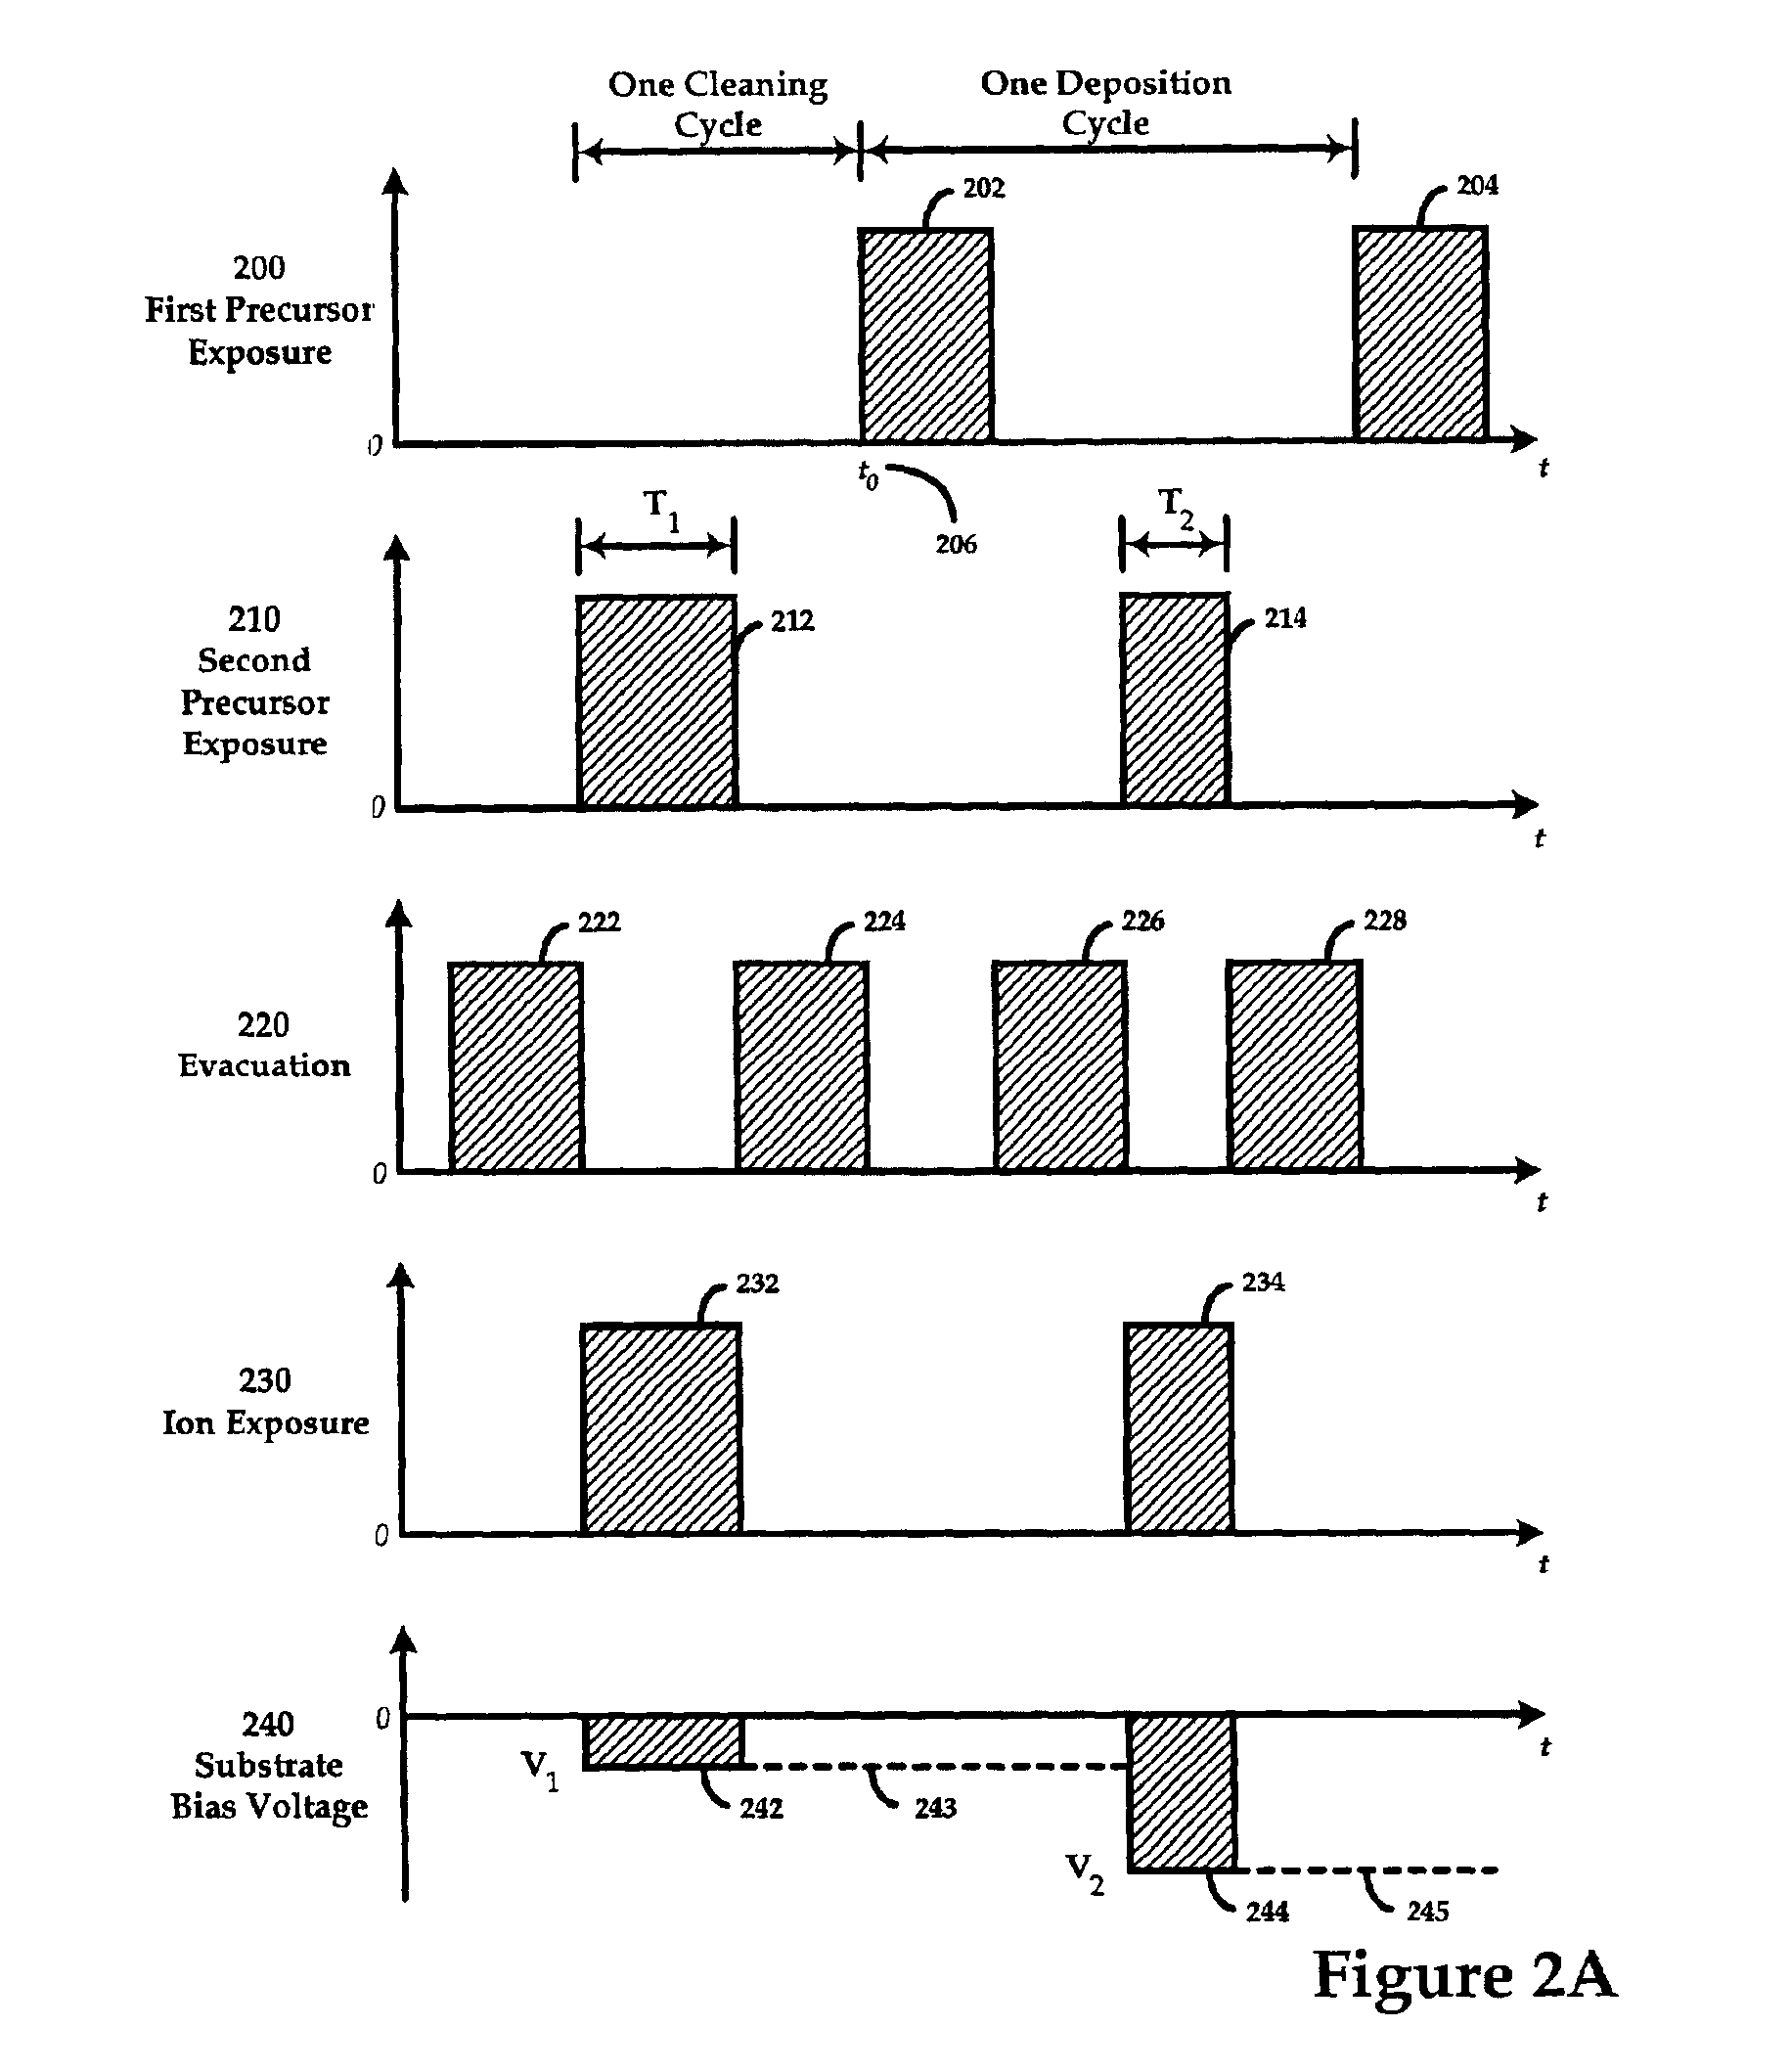 Method for integrated in-situ cleaning and subsequent atomic layer deposition within a single processing chamber